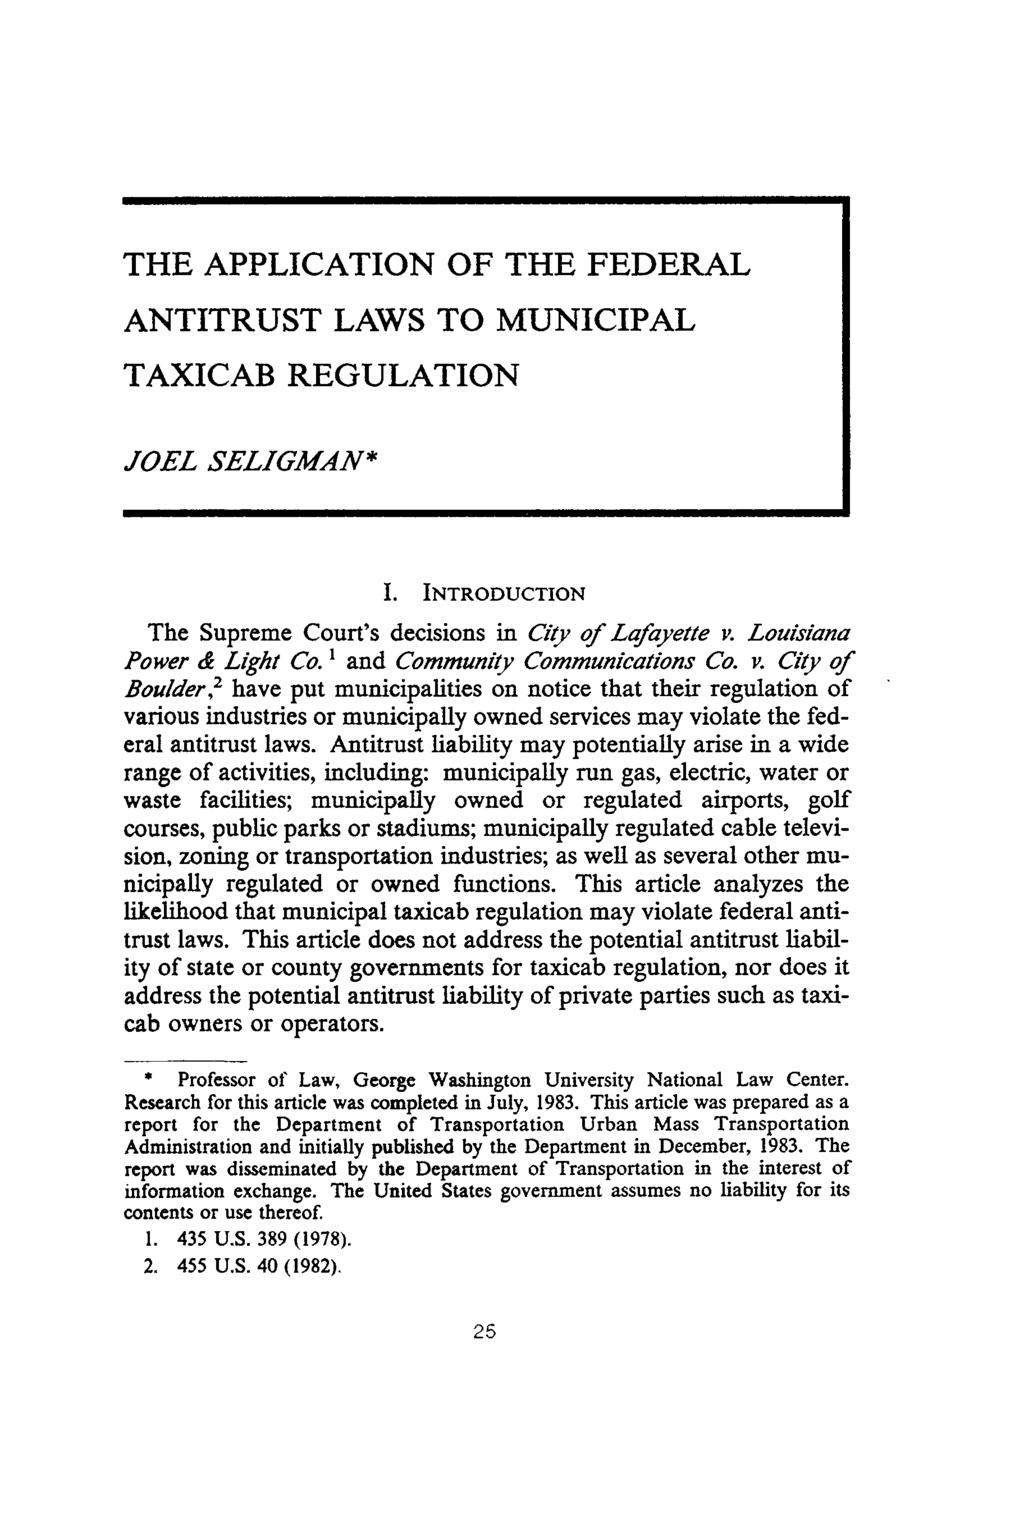 THE APPLICATION OF THE FEDERAL ANTITRUST LAWS TO MUNICIPAL TAXICAB REGULATION JOEL SELIGMAN* I. INTRODUCTION The Supreme Court's decisions in City of Lafayette v. Louisiana Power & Light Co.